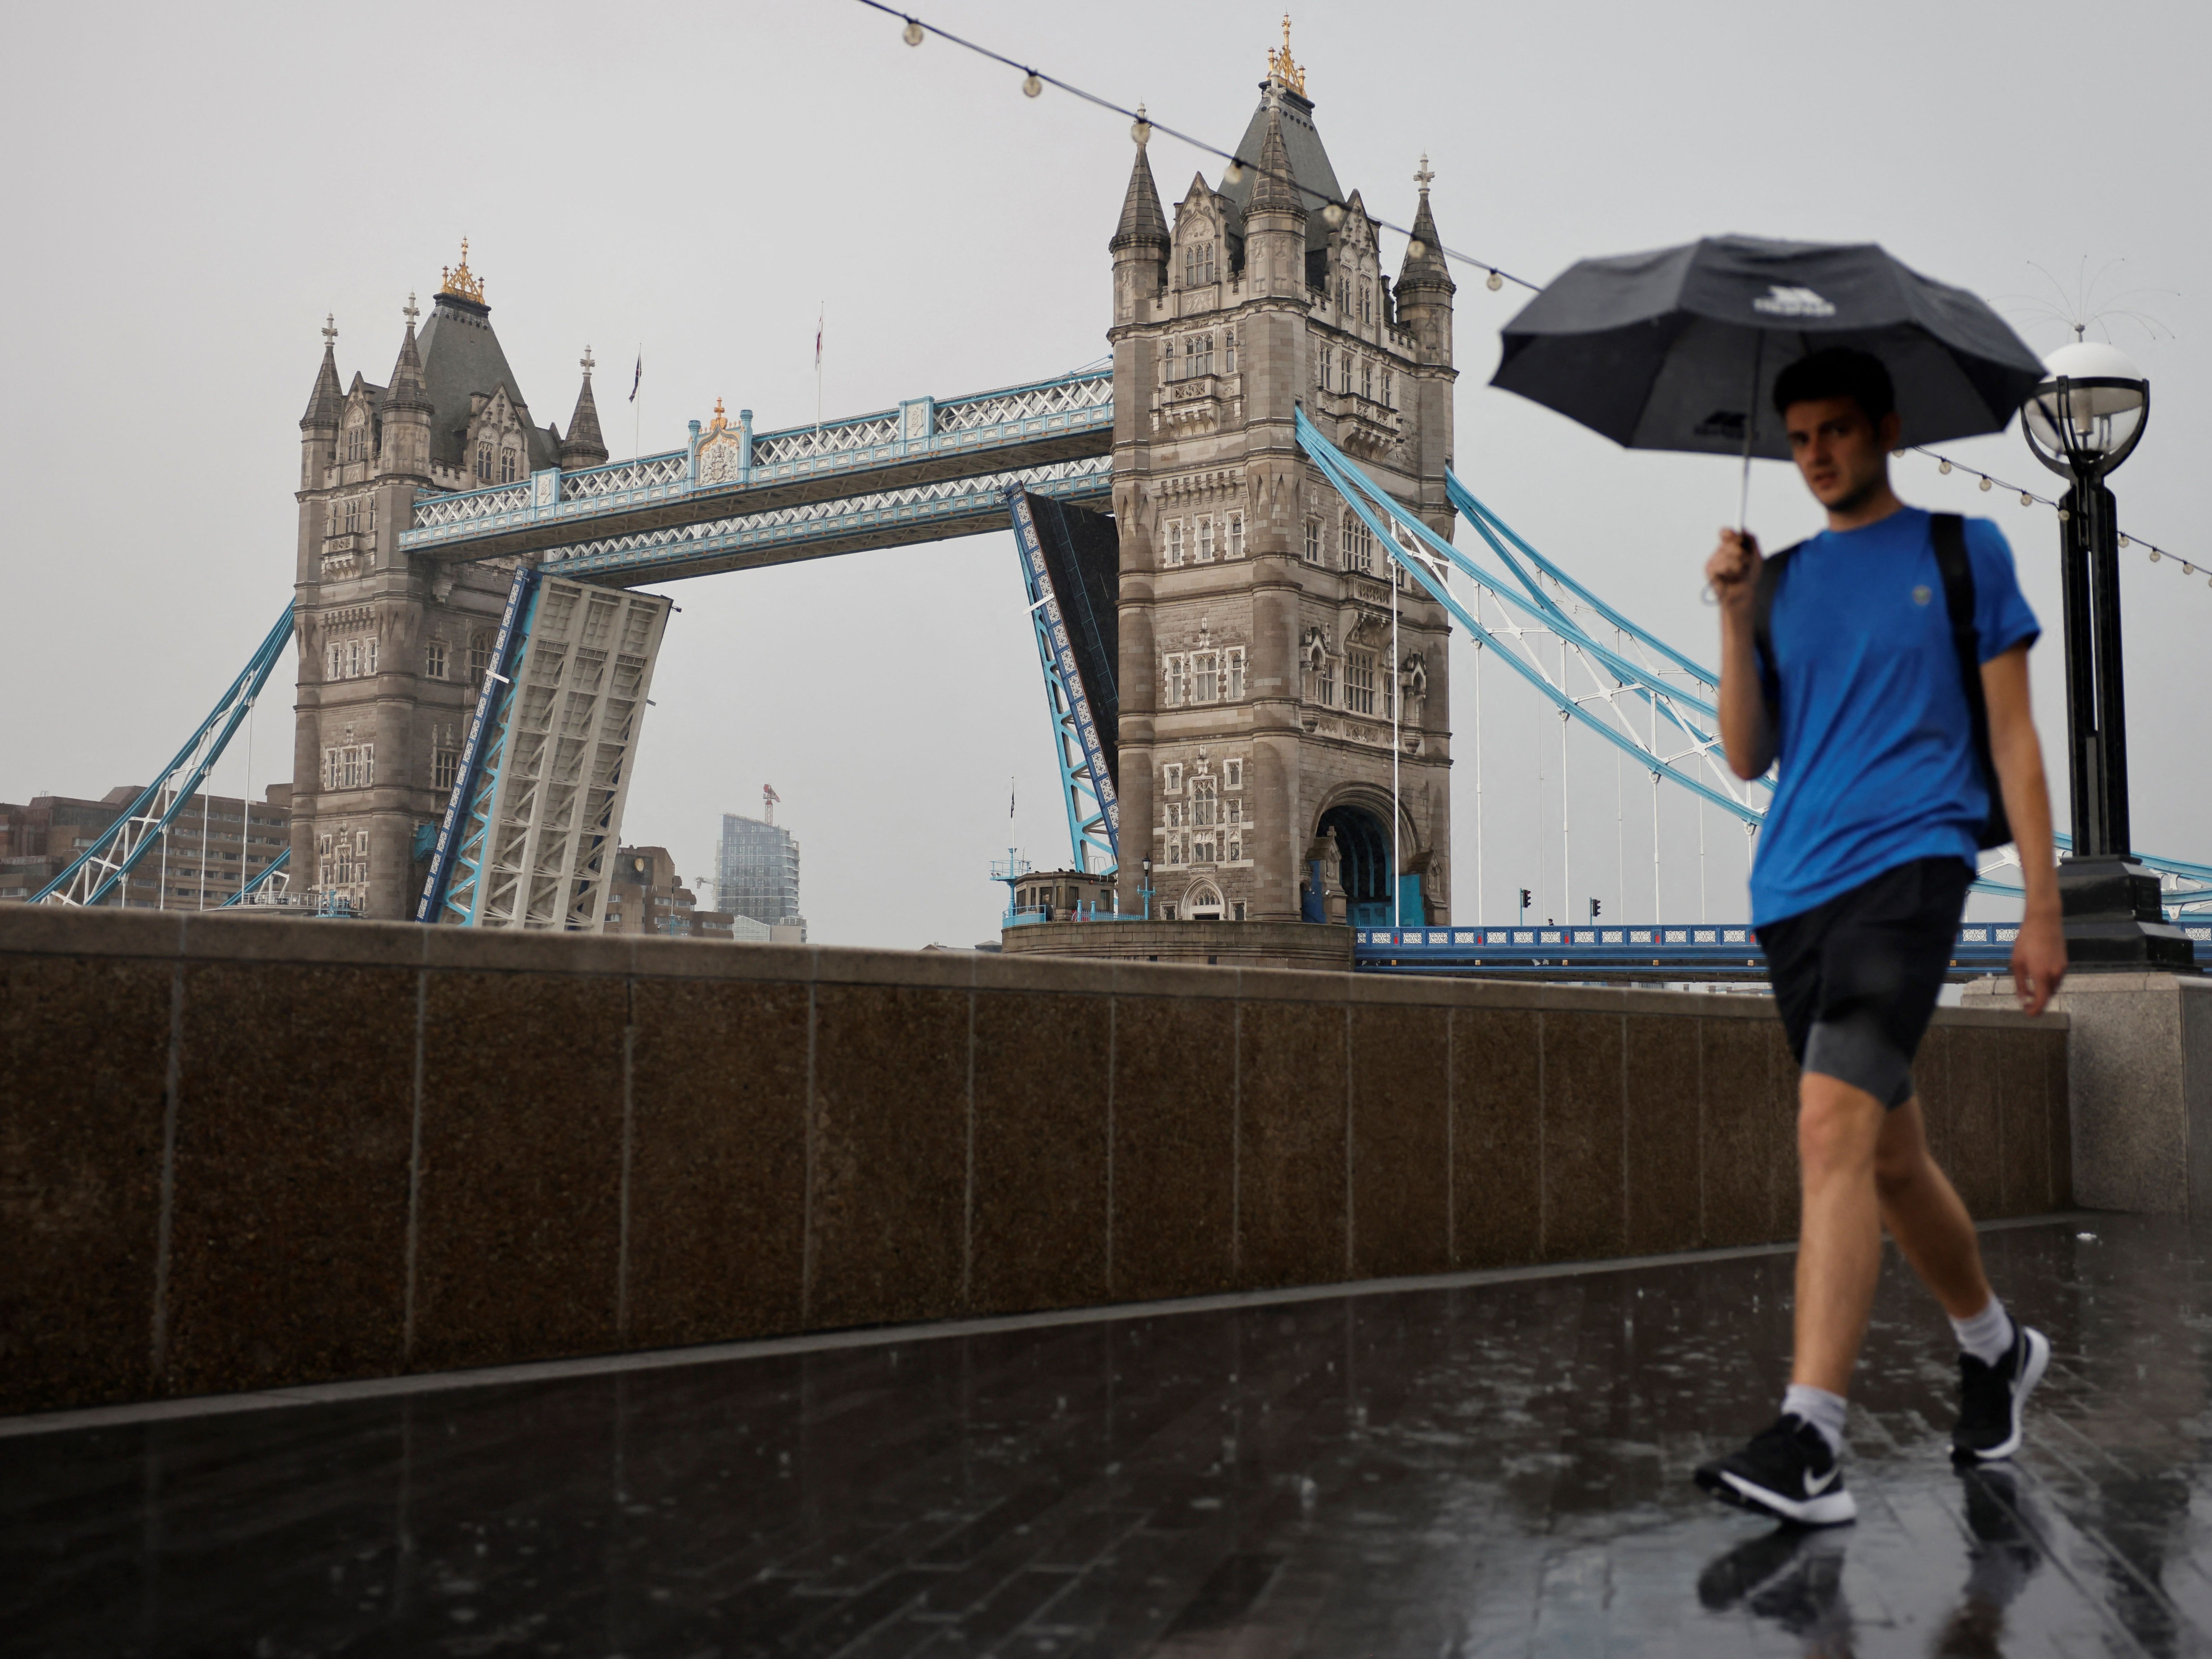 A man is pictured walking in the rain by London’s Tower Bridge earlier this month